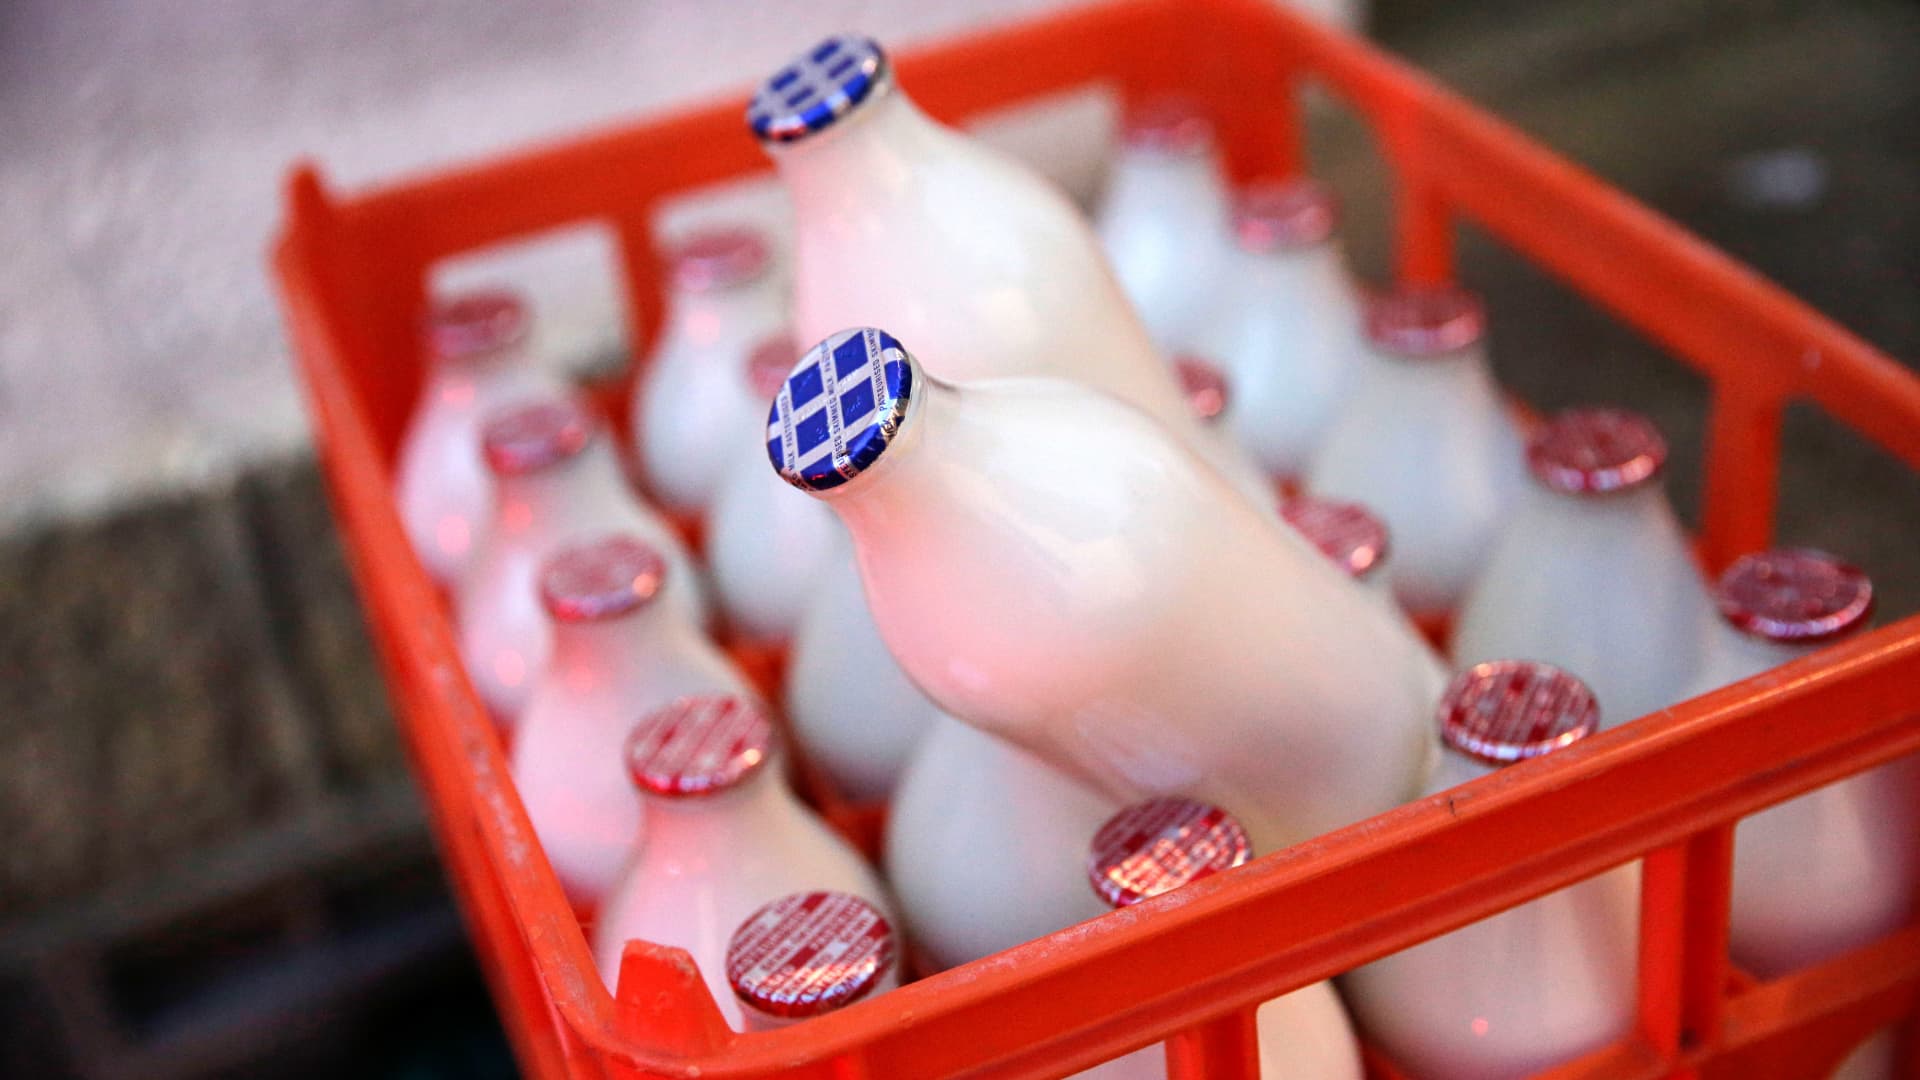 Milk prices in the world's dairy powerhouse India have spiked 15%